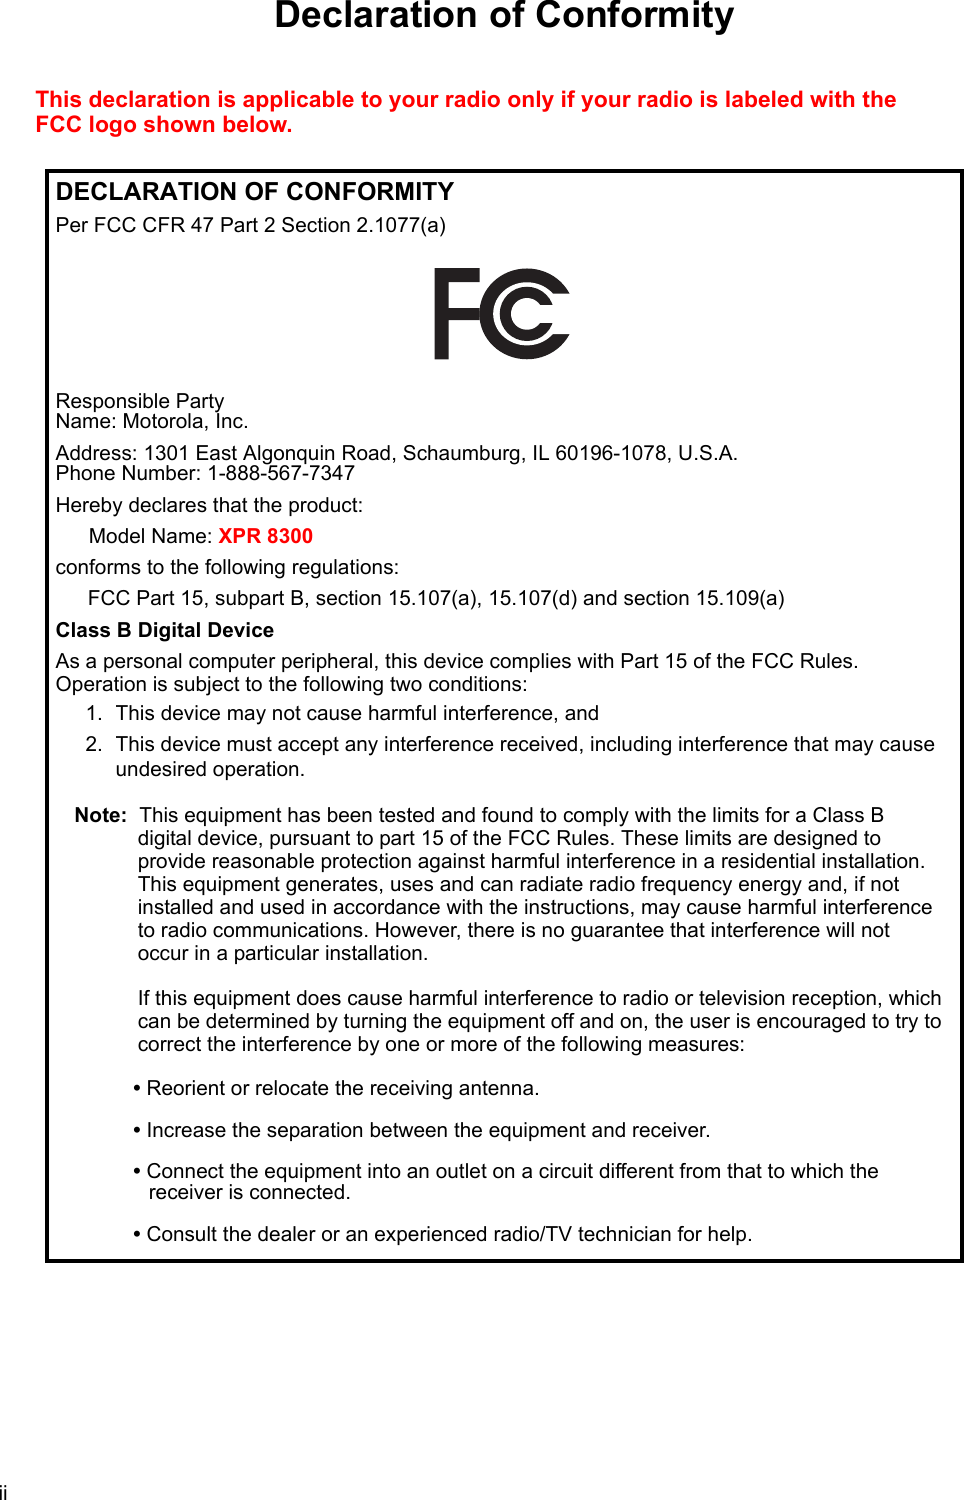 iiDeclaration of ConformityThis declaration is applicable to your radio only if your radio is labeled with the FCC logo shown below.DECLARATION OF CONFORMITYPer FCC CFR 47 Part 2 Section 2.1077(a)Responsible Party  Name: Motorola, Inc.Address: 1301 East Algonquin Road, Schaumburg, IL 60196-1078, U.S.A. Phone Number: 1-888-567-7347Hereby declares that the product:Model Name: XPR 8300conforms to the following regulations:FCC Part 15, subpart B, section 15.107(a), 15.107(d) and section 15.109(a)Class B Digital DeviceAs a personal computer peripheral, this device complies with Part 15 of the FCC Rules.  Operation is subject to the following two conditions:1. This device may not cause harmful interference, and 2. This device must accept any interference received, including interference that may cause undesired operation.Note: This equipment has been tested and found to comply with the limits for a Class B  digital device, pursuant to part 15 of the FCC Rules. These limits are designed to  provide reasonable protection against harmful interference in a residential installation.  This equipment generates, uses and can radiate radio frequency energy and, if not installed and used in accordance with the instructions, may cause harmful interference  to radio communications. However, there is no guarantee that interference will not  occur in a particular installation.   If this equipment does cause harmful interference to radio or television reception, which can be determined by turning the equipment off and on, the user is encouraged to try to correct the interference by one or more of the following measures:• Reorient or relocate the receiving antenna.• Increase the separation between the equipment and receiver.• Connect the equipment into an outlet on a circuit different from that to which the  receiver is connected. • Consult the dealer or an experienced radio/TV technician for help.